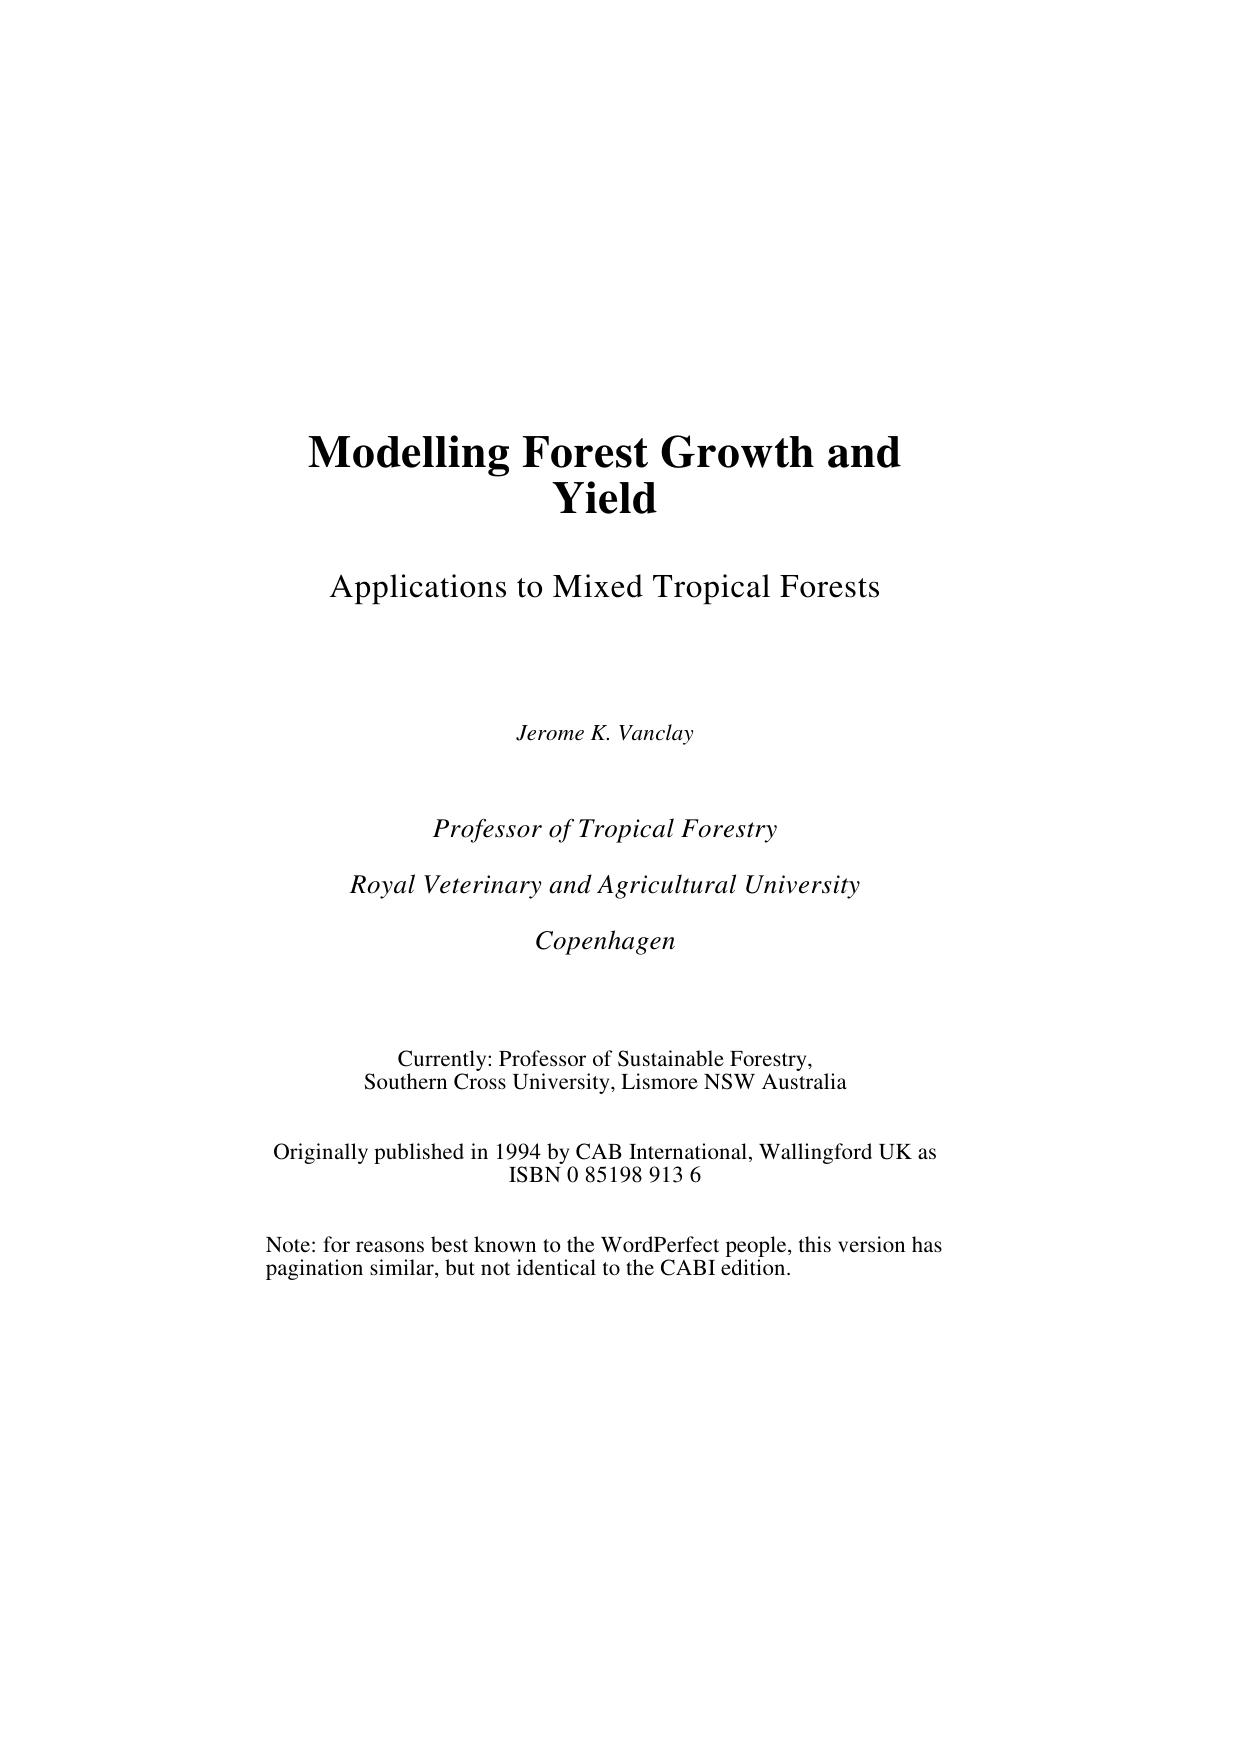 Modelling Forest Growth and Yield  1994